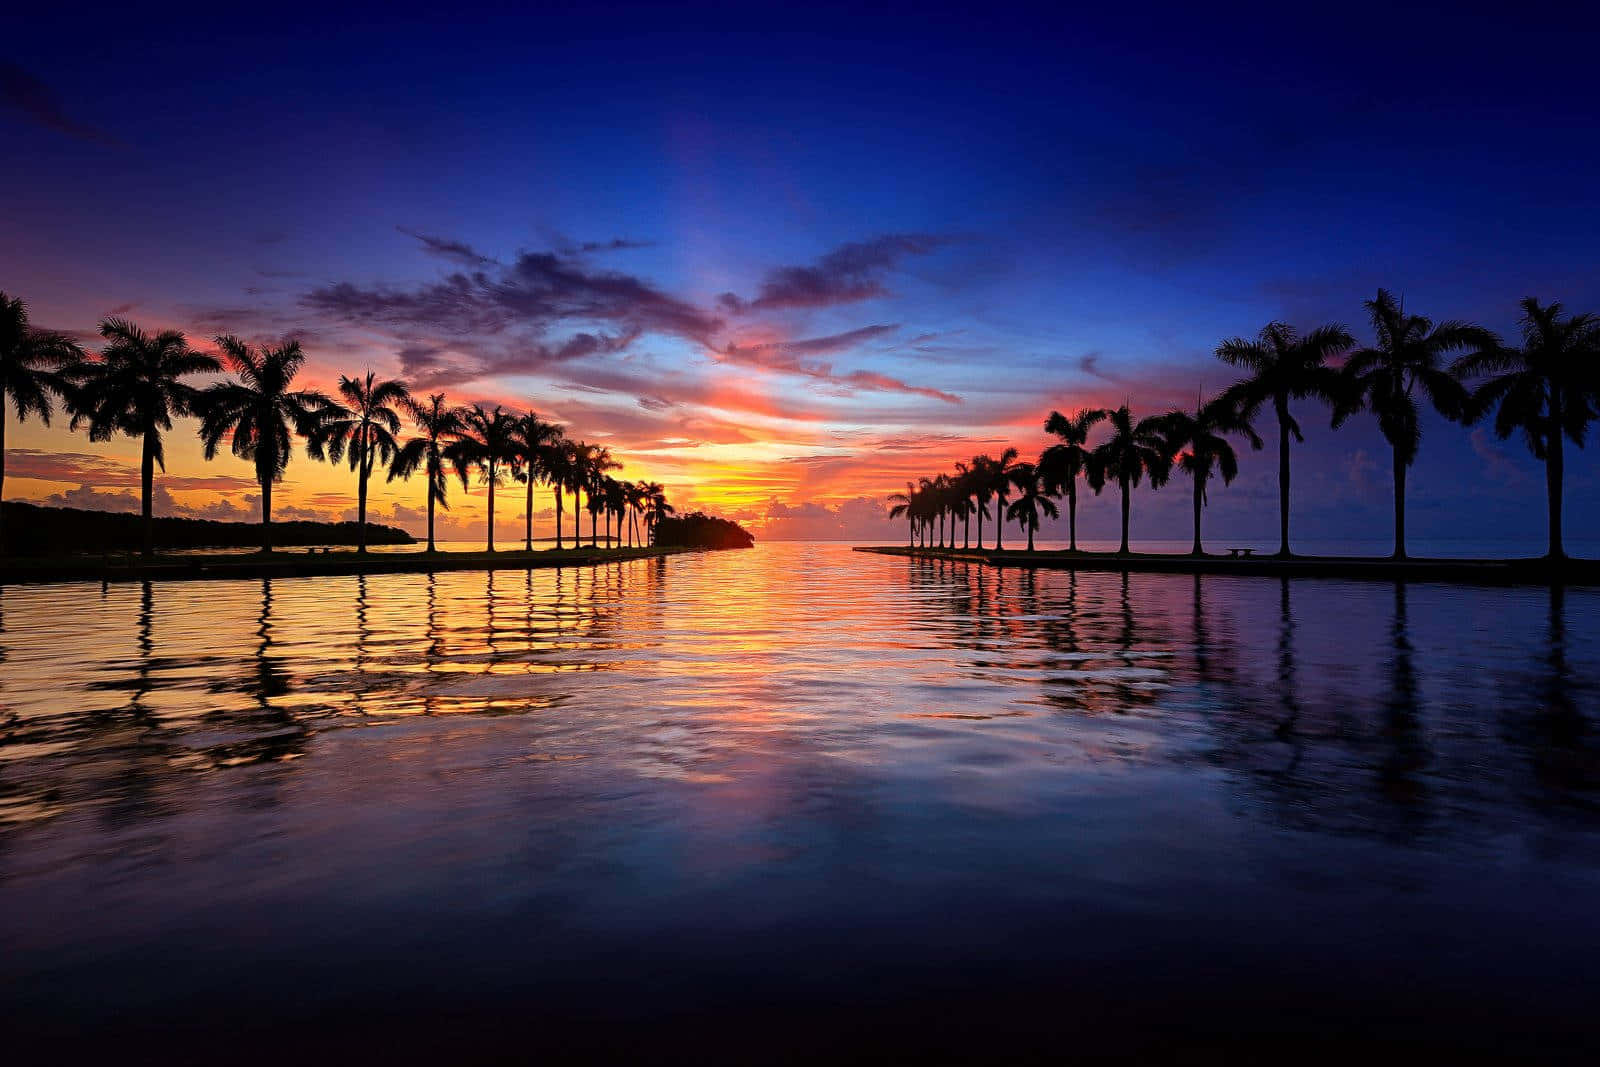 A Sunset With Palm Trees In The Water